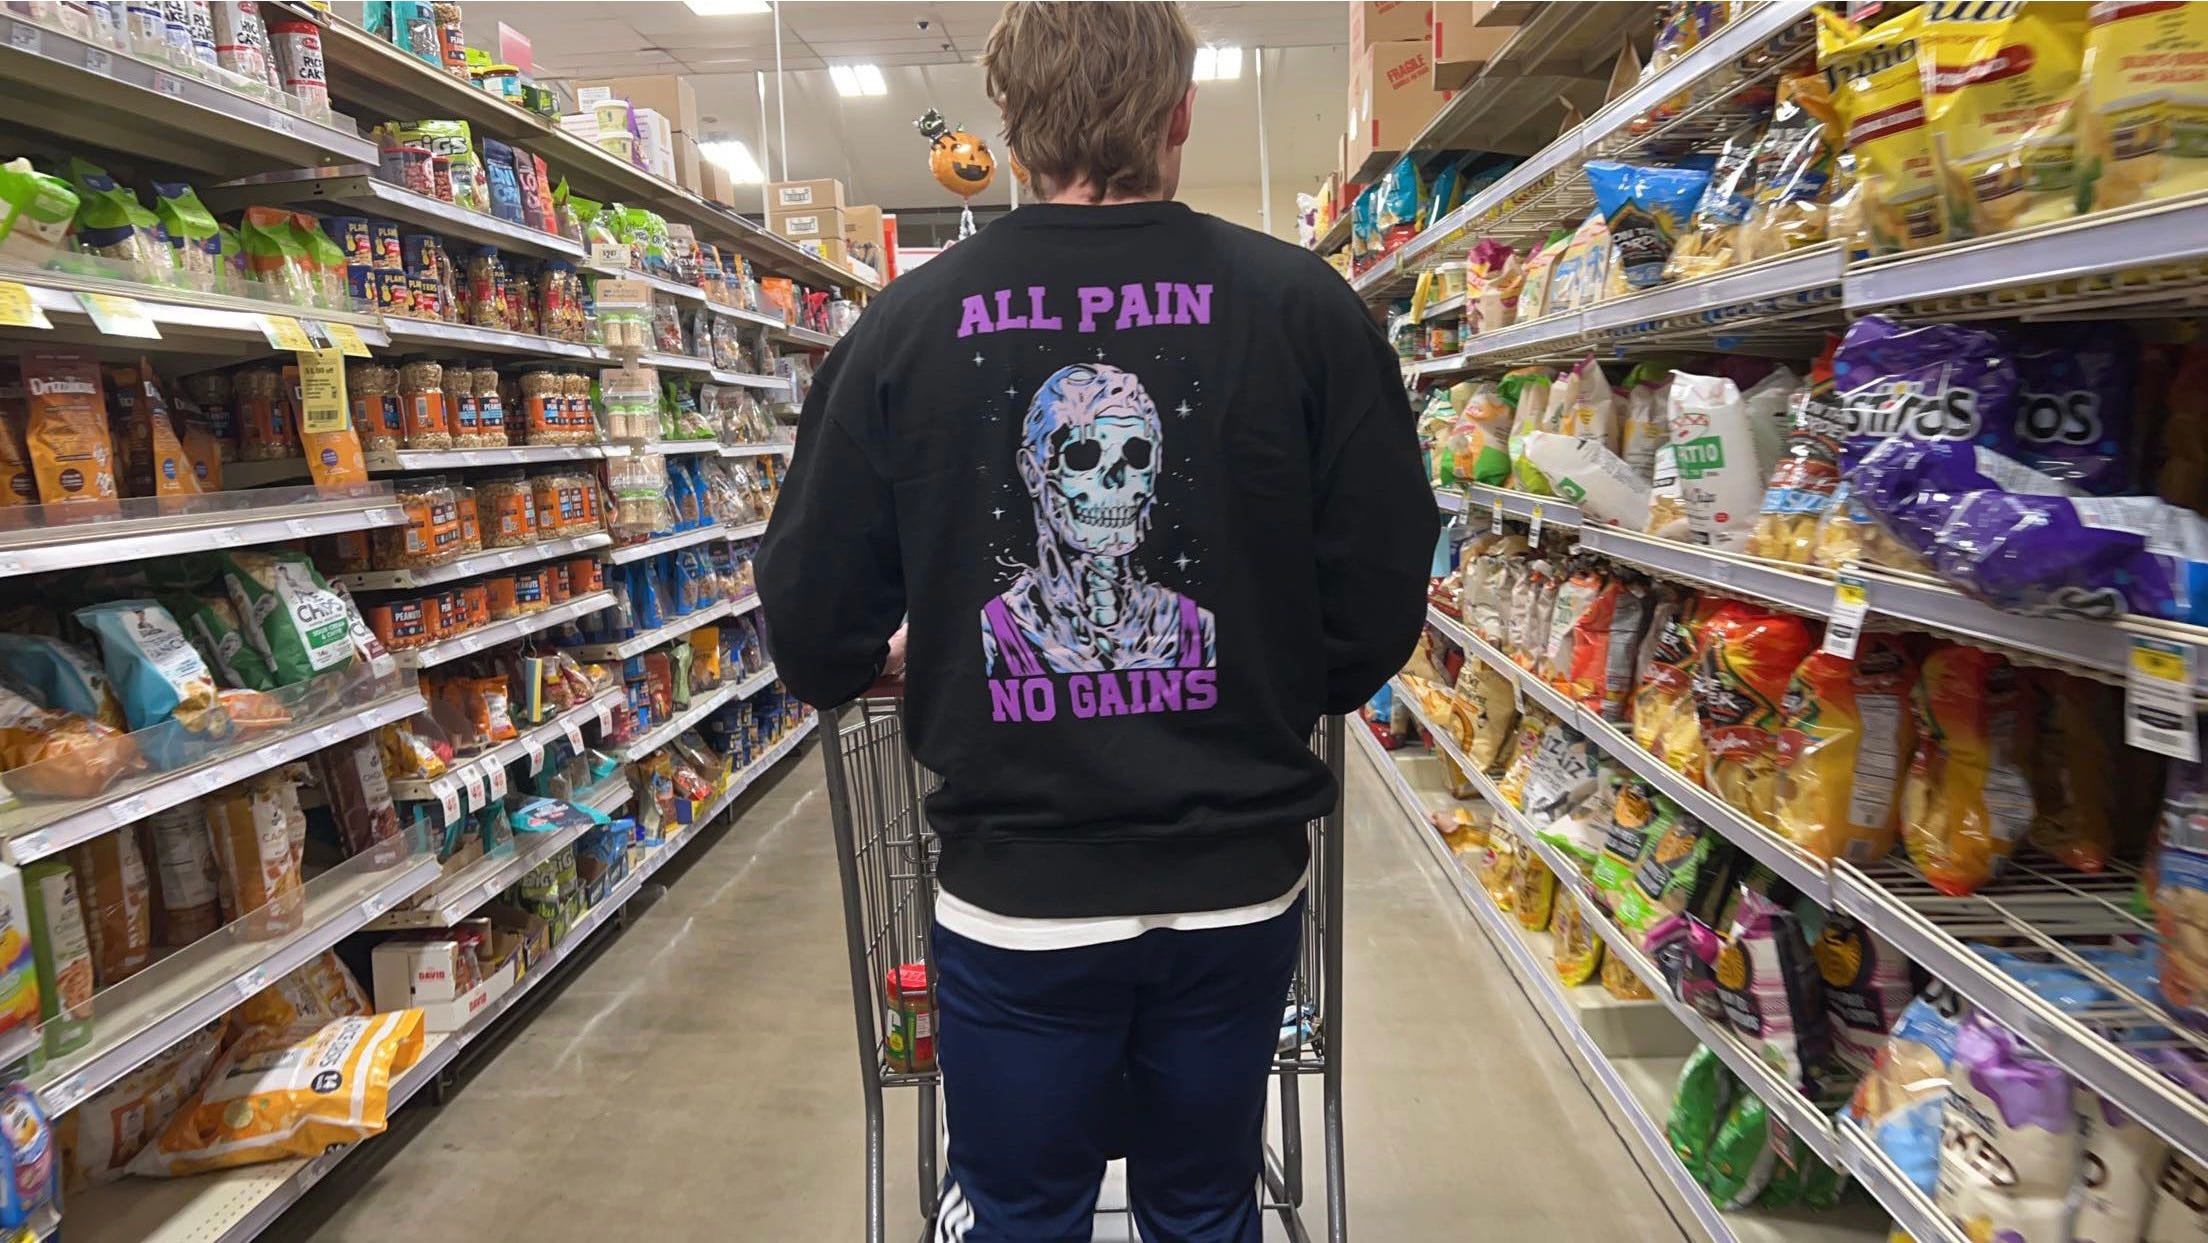 brandon wells in a grocery store wearing a sweatshirt that says ALL PAIN NO GAINS